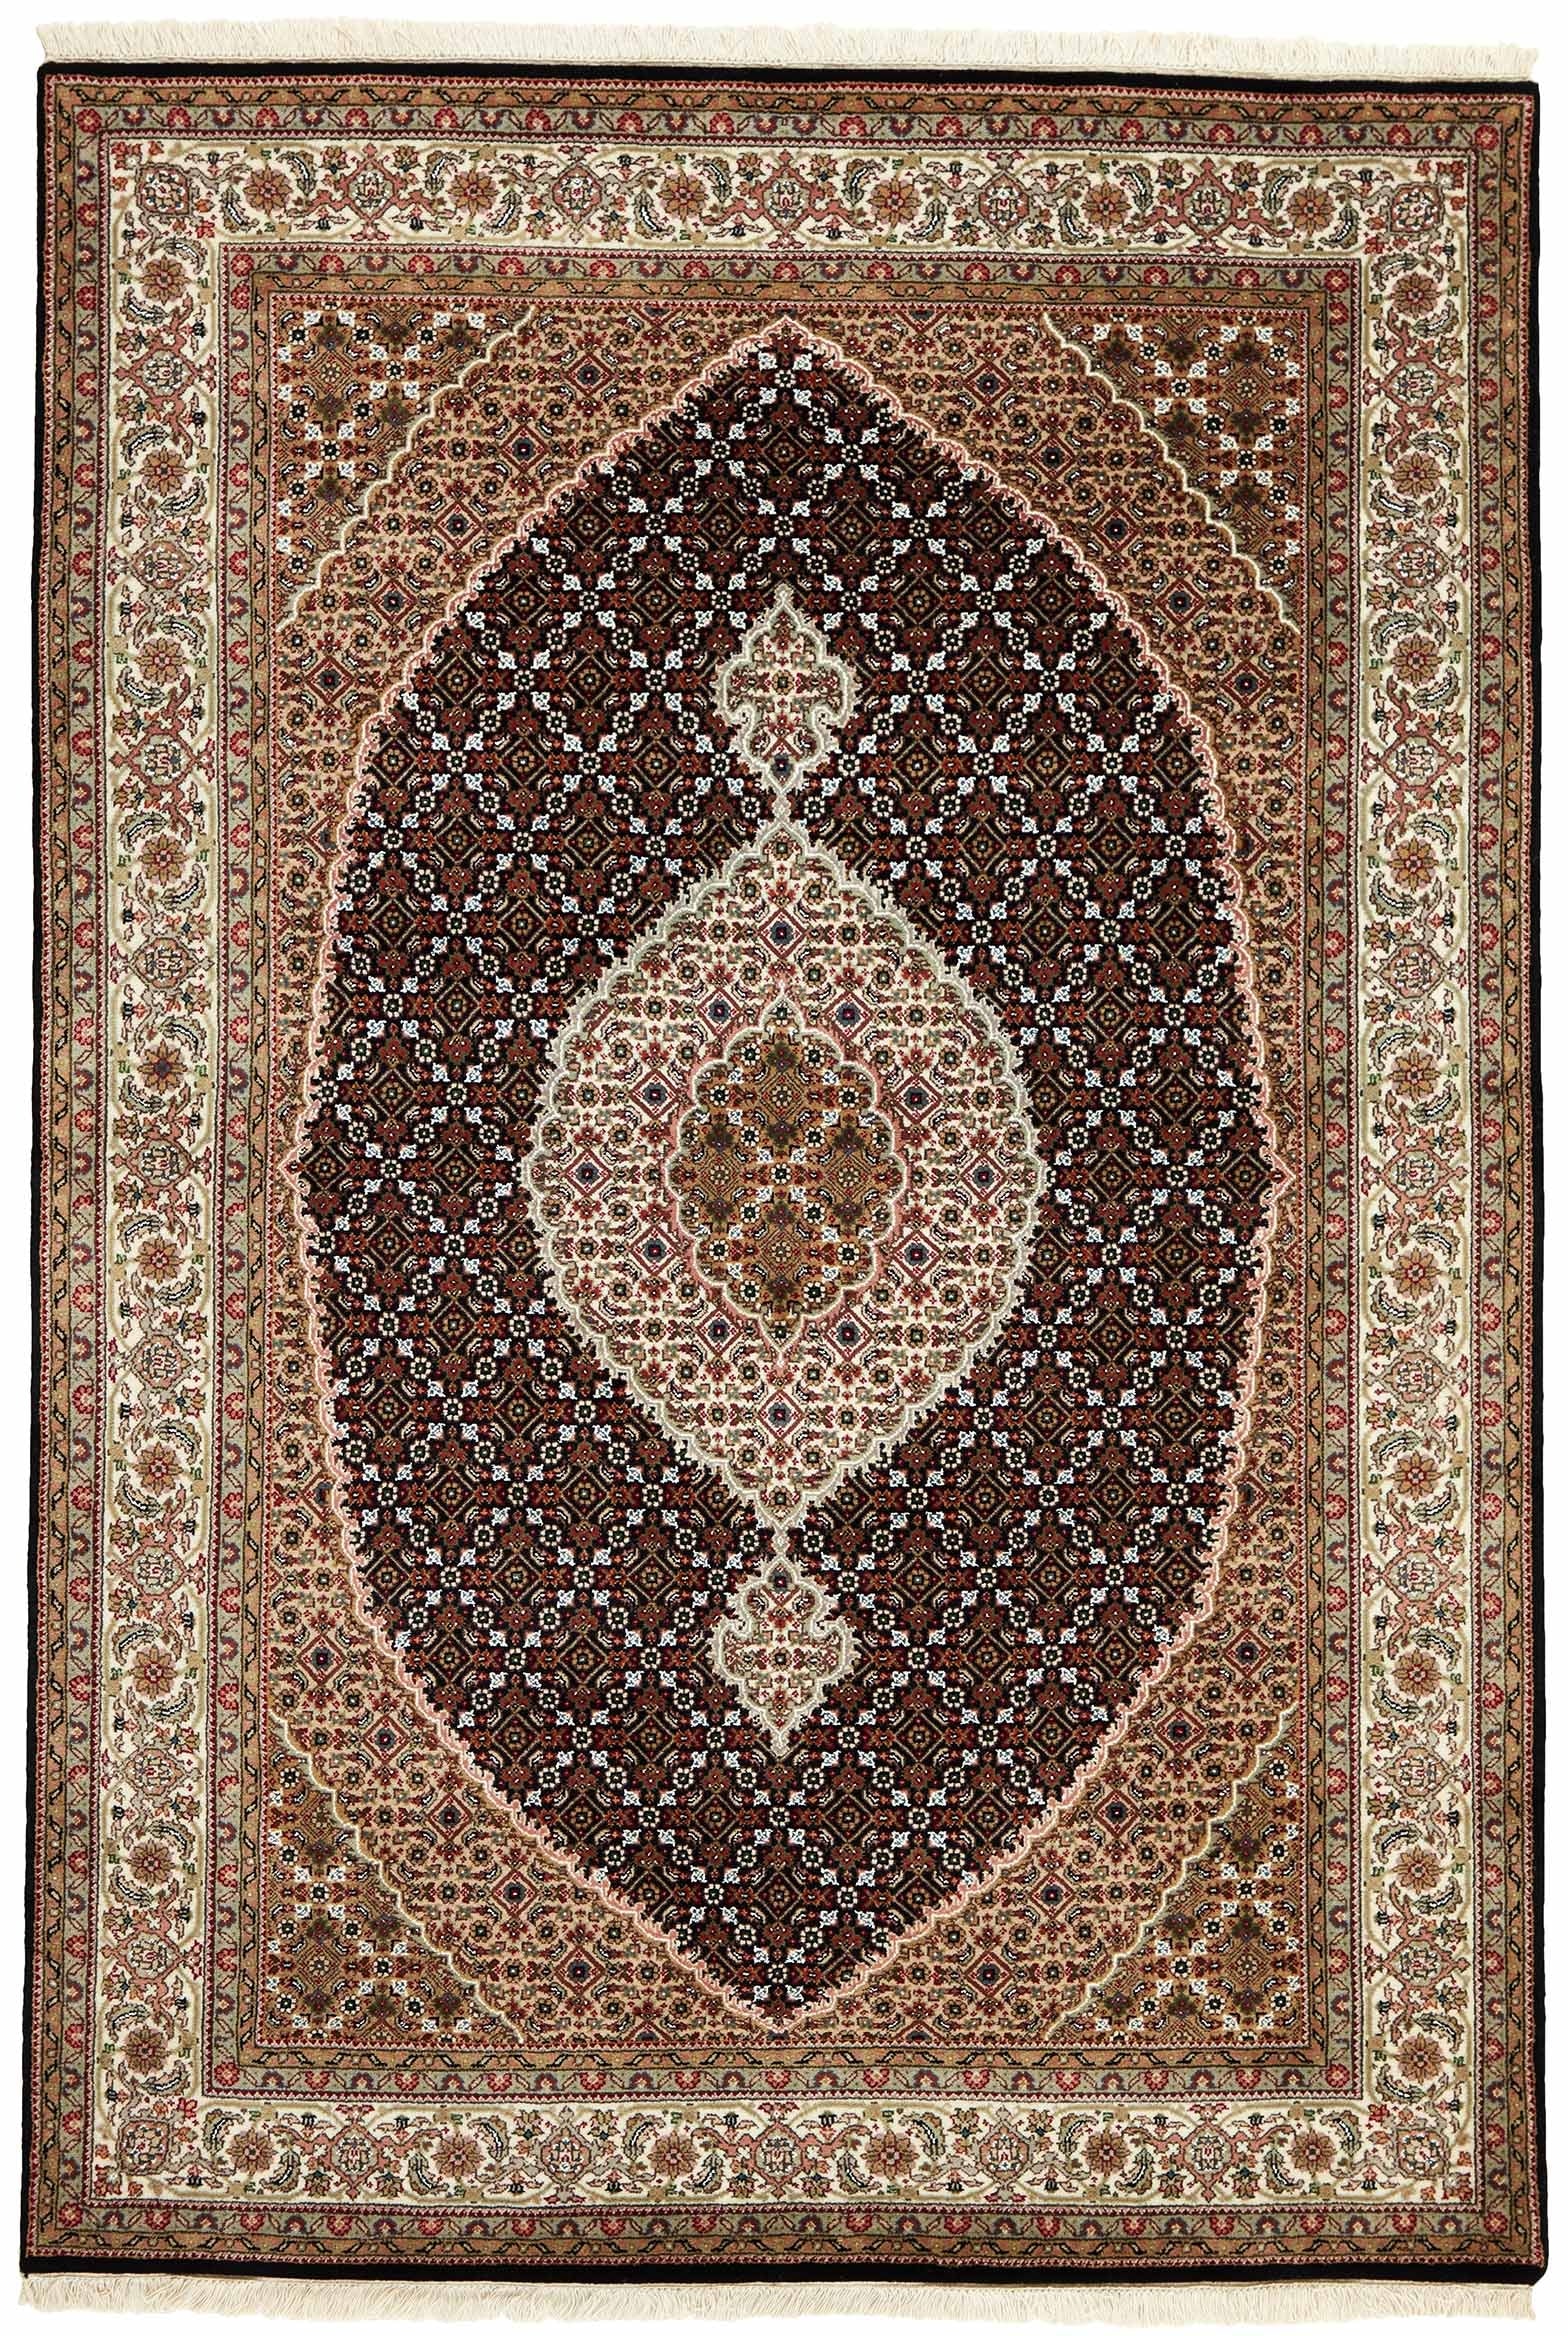 Authentic Oriental rug with traditional geometric and floral design in red, blue, green, beige, brown and black